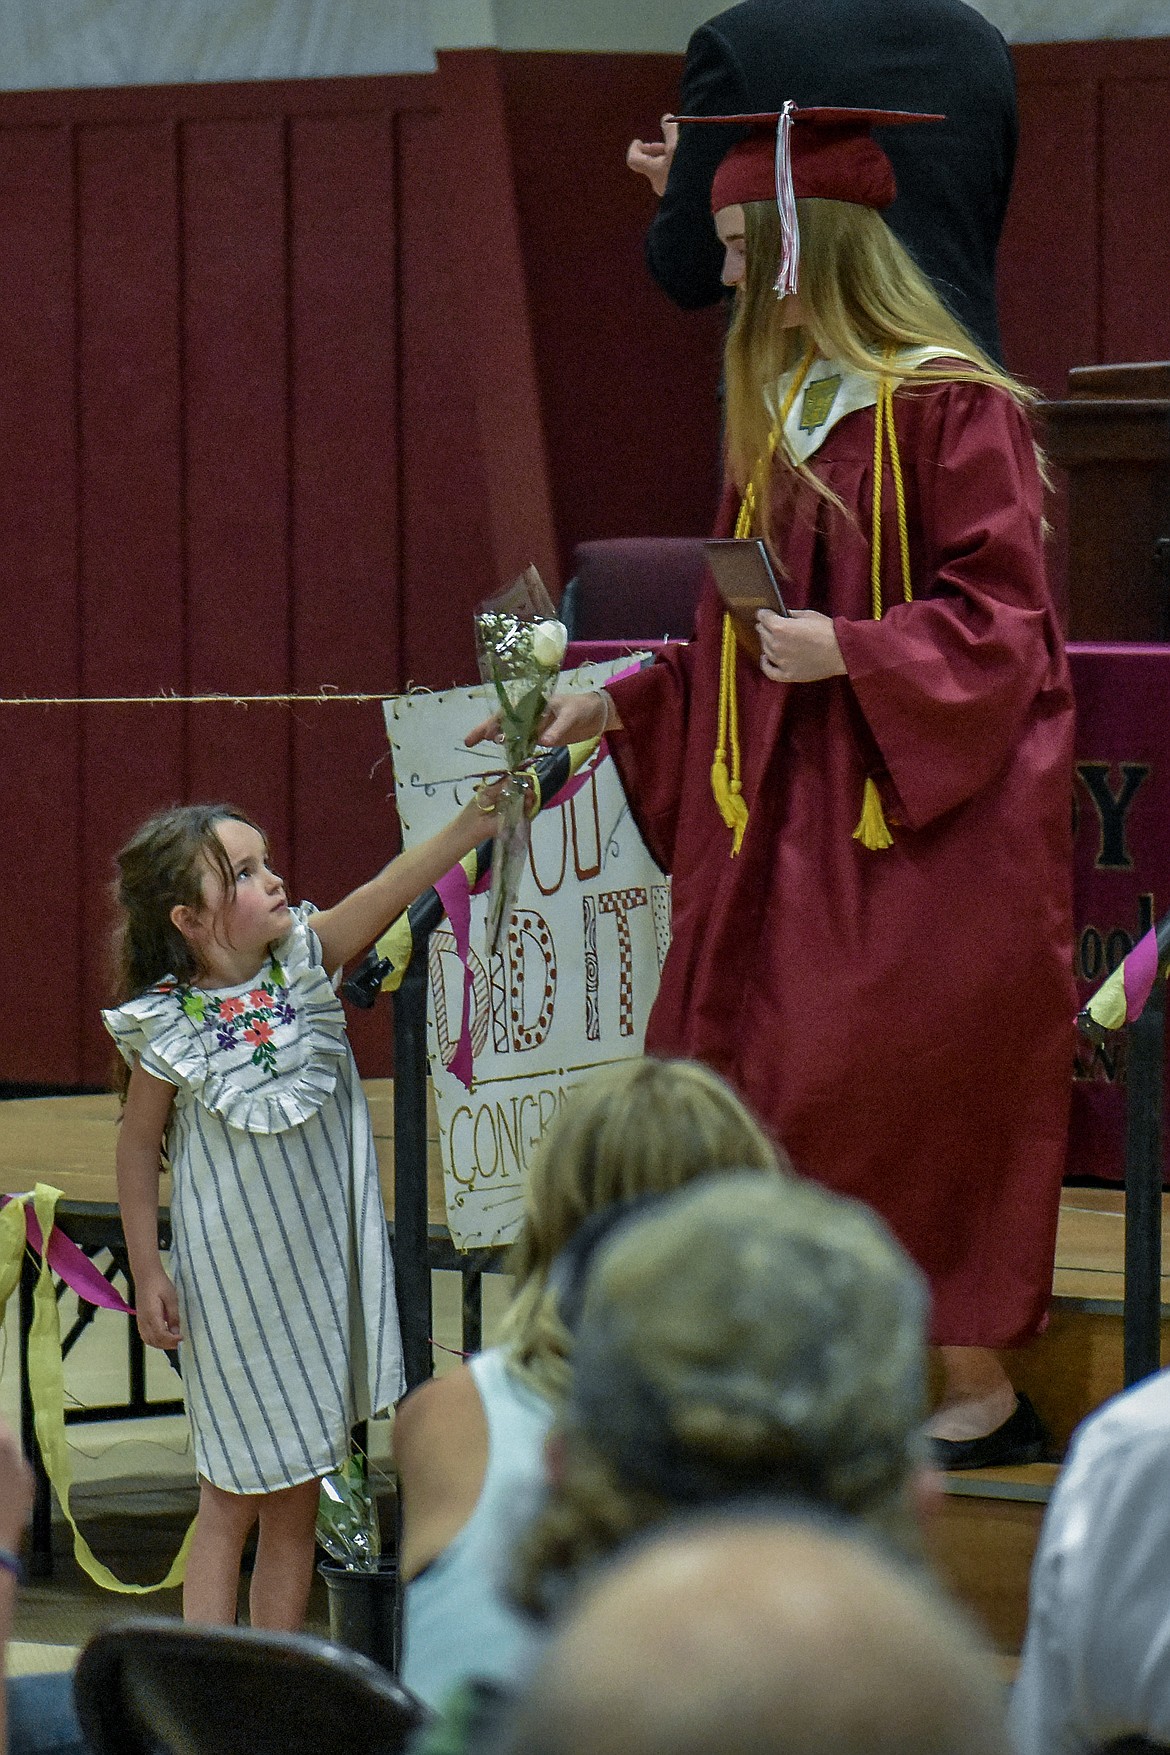 Flower girl Embry Cairns hands a white rose to Troy High School graduate Sarah Osborn as she leaves the stage after receiving his diploma during graduation ceremonies on Saturday, June 2, 2018. (Ben Kibbey/The Western News)